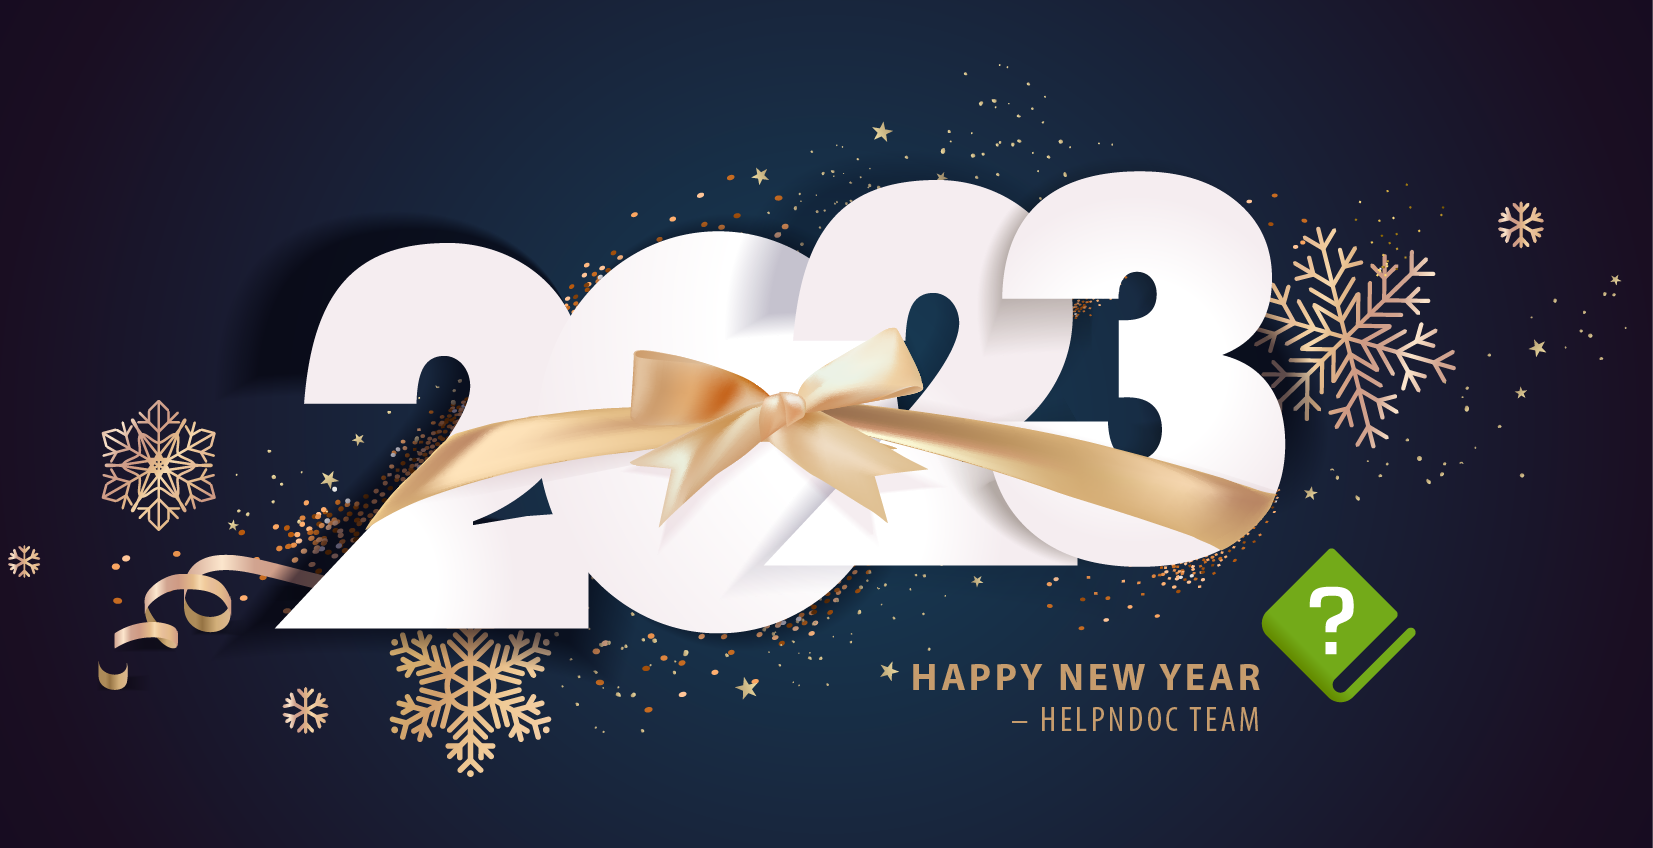 Happy new year 2023 from HelpNDoc team